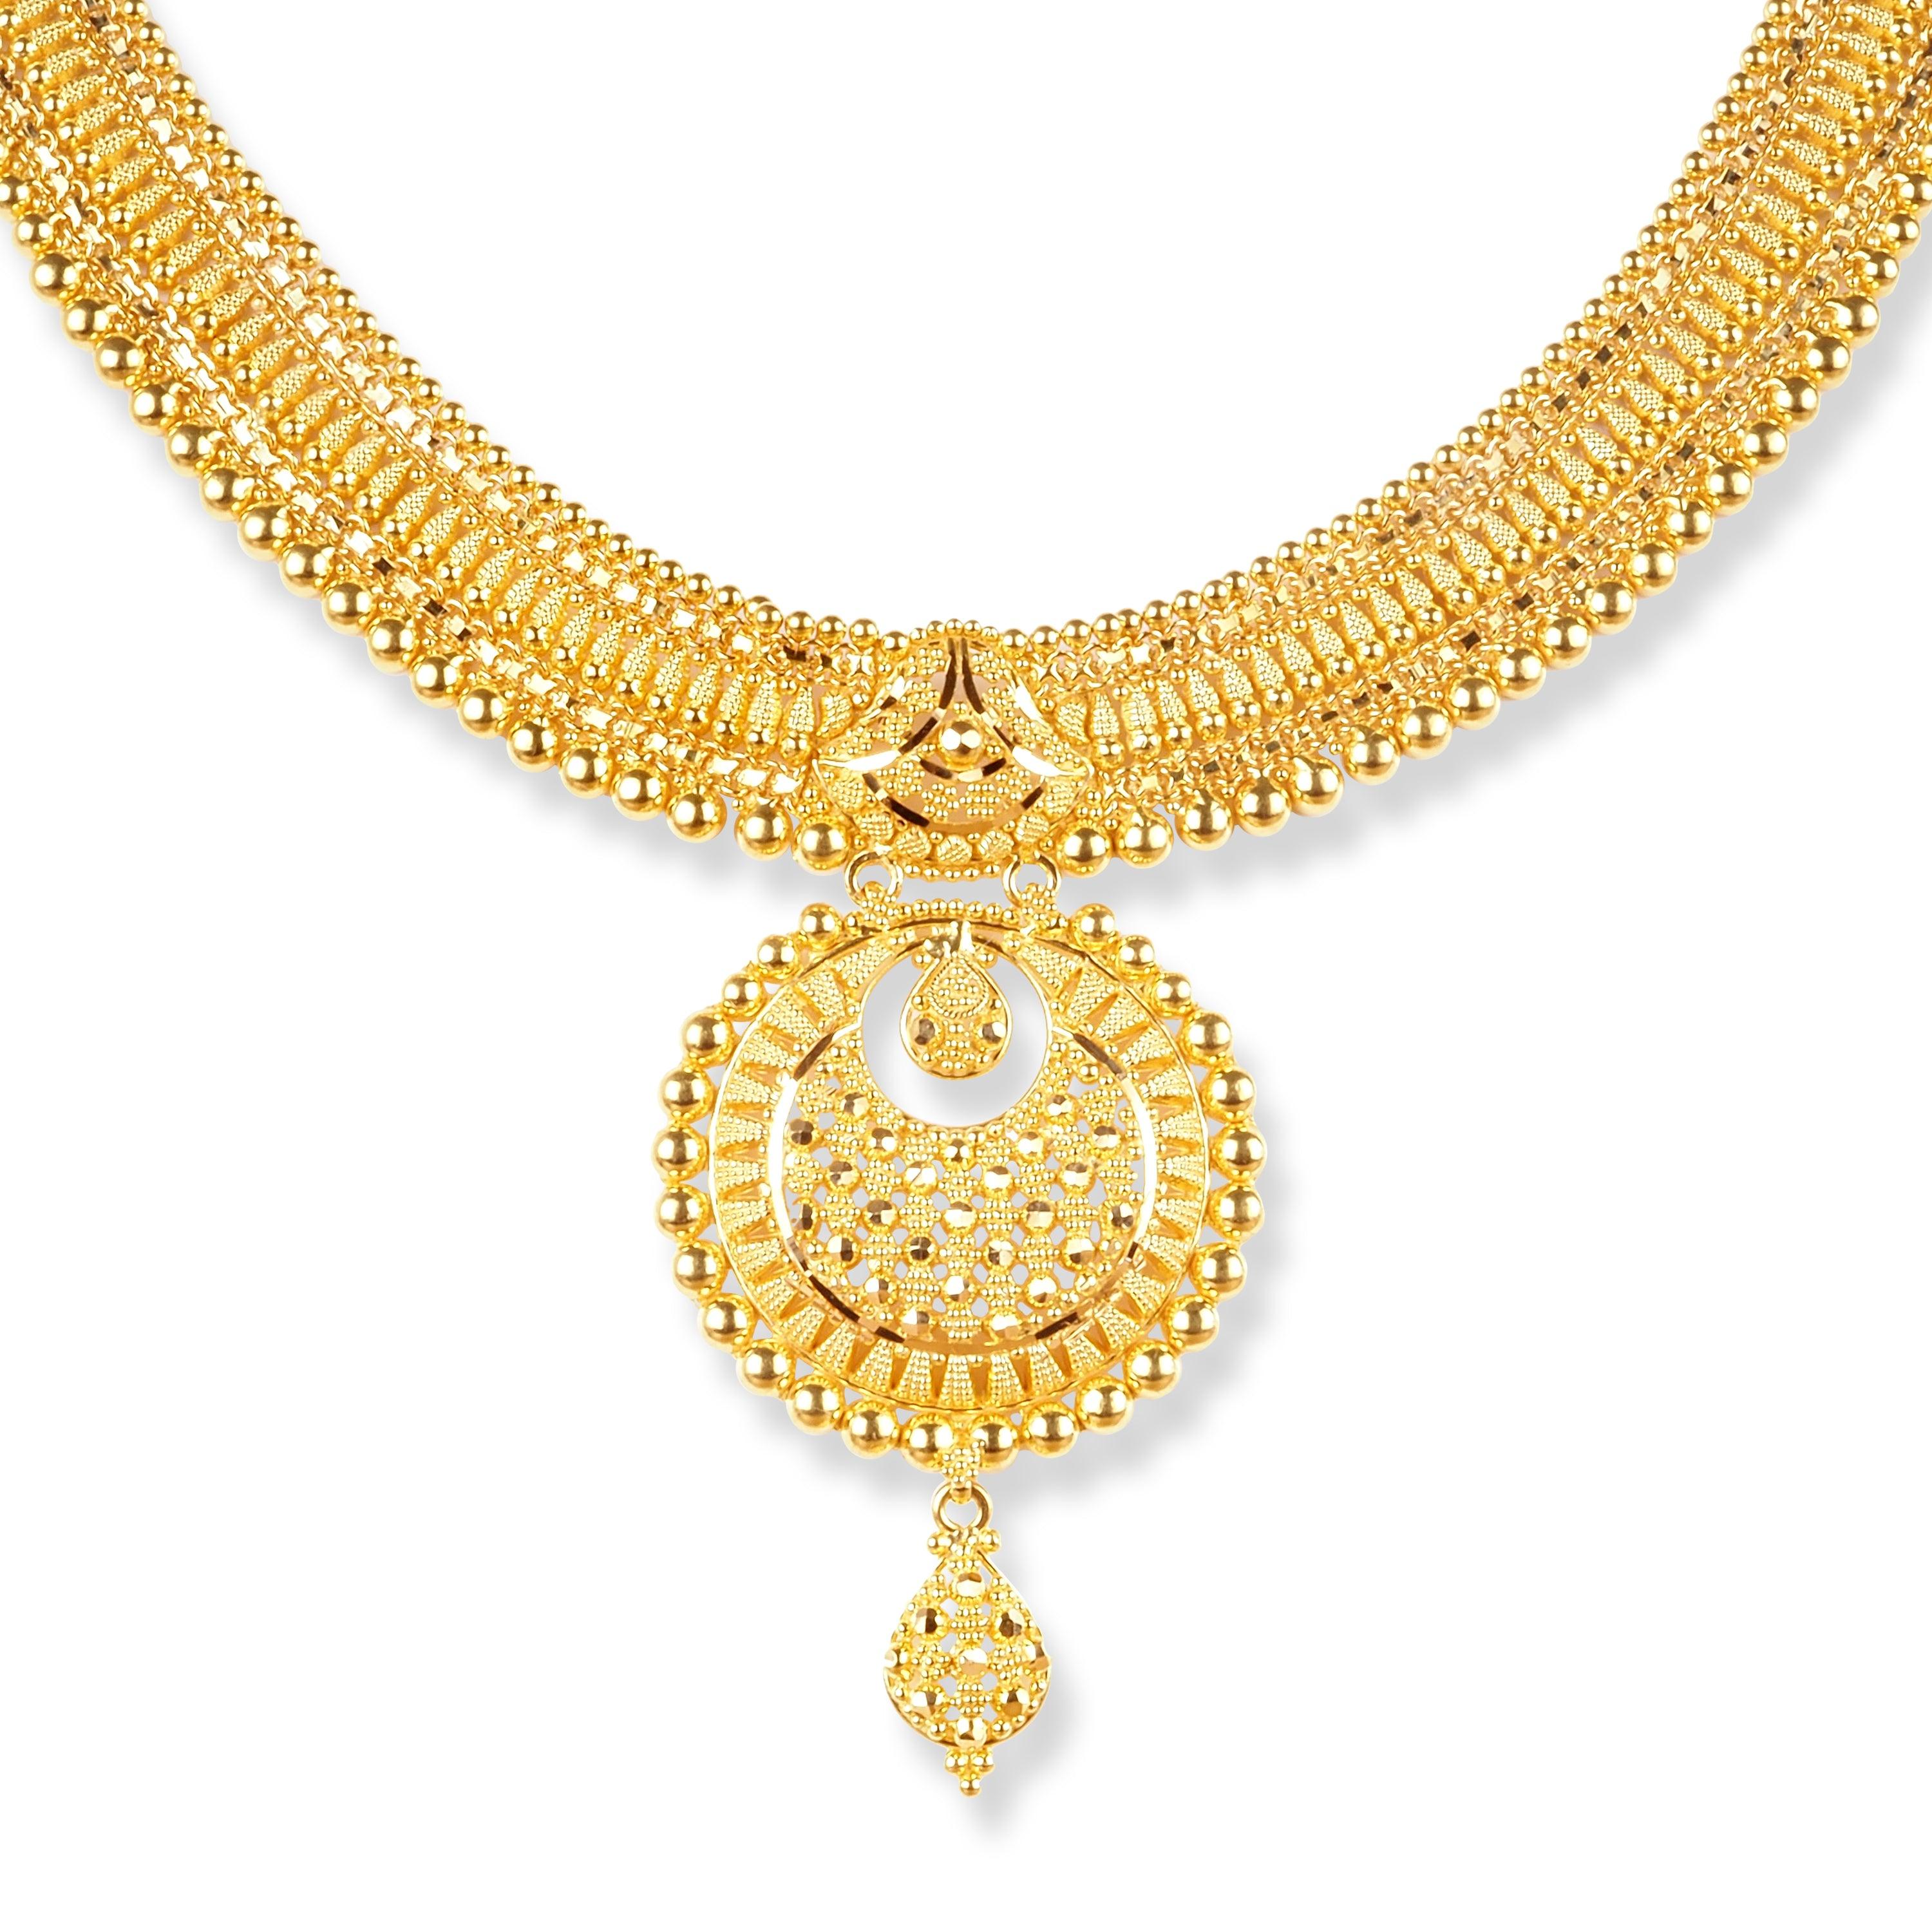 22ct Gold Set with Filigree Work (Necklace + Drop Earrings) N-8169 E-8169 - Minar Jewellers